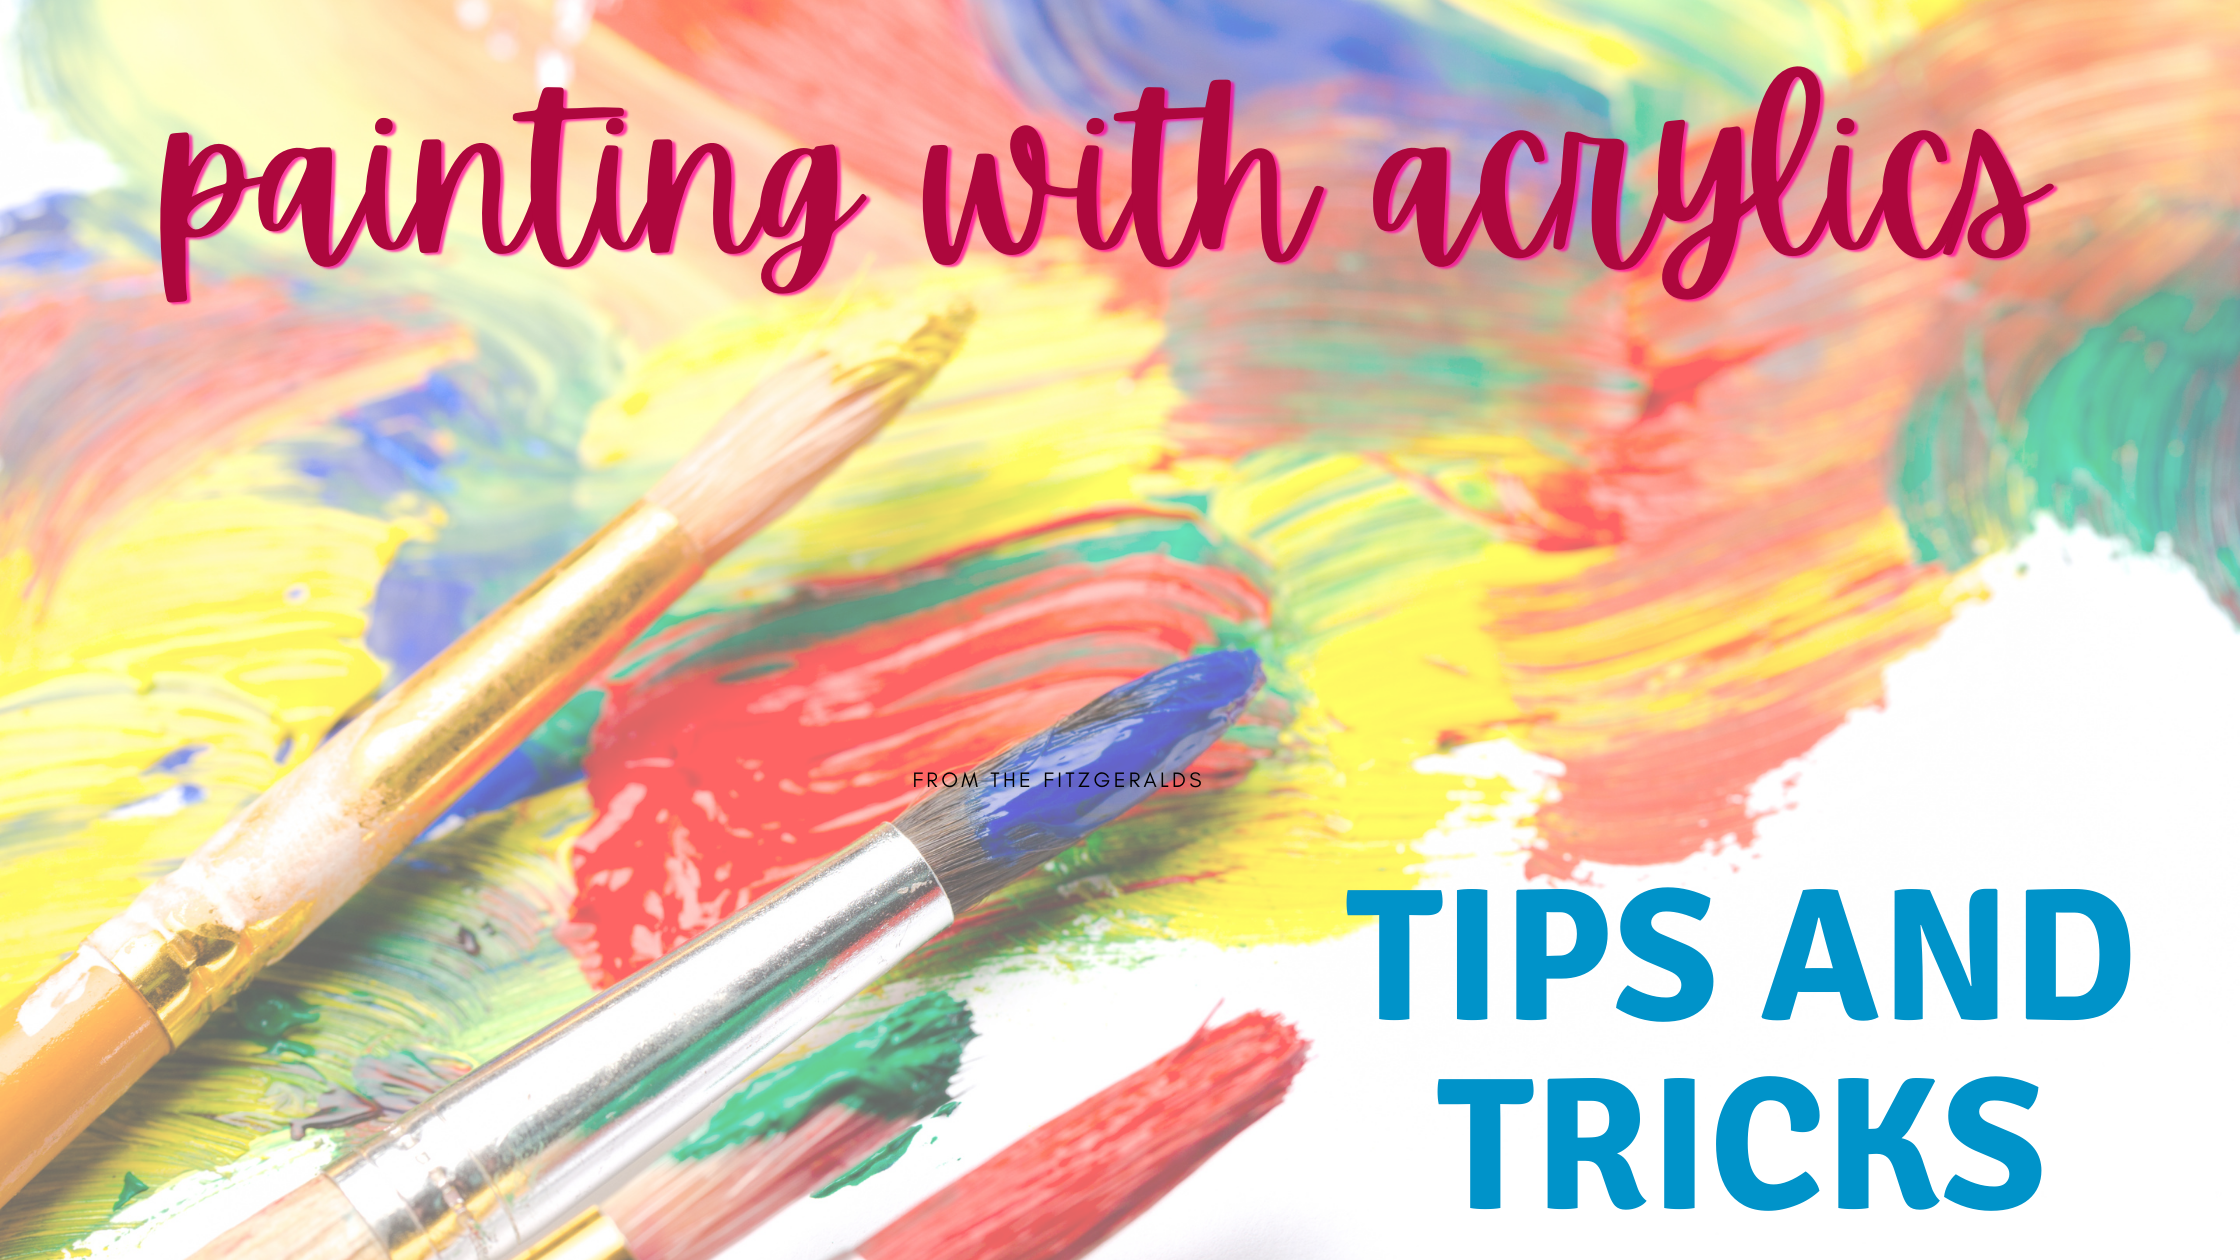 Acrylic Painting Tips for Beginners